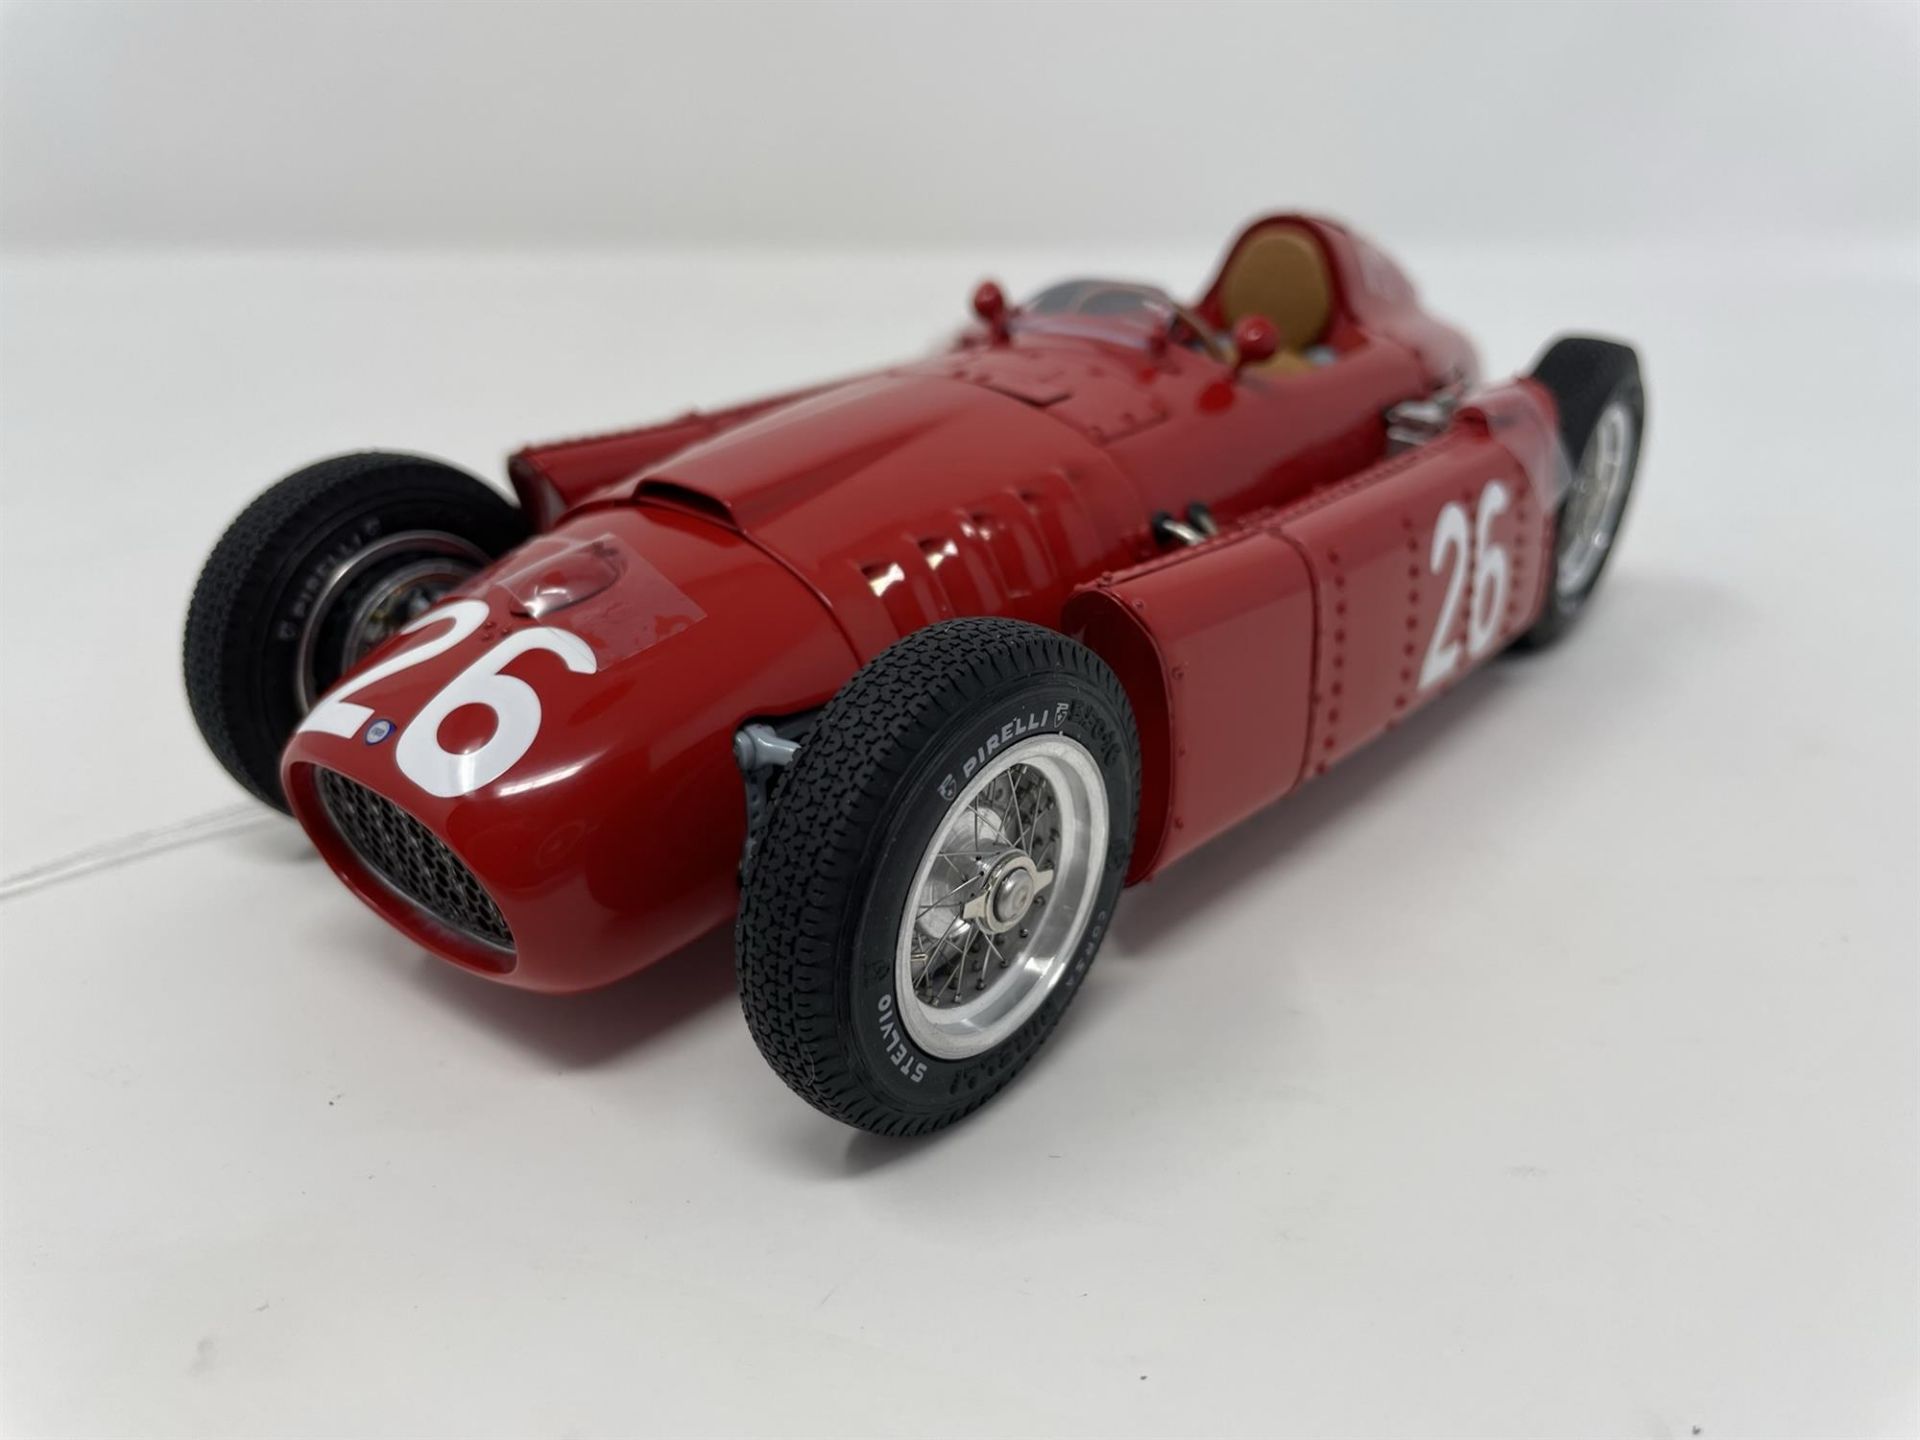 CMC Lancia D50 1:18th Scale Highly Detailed Model - Image 4 of 10